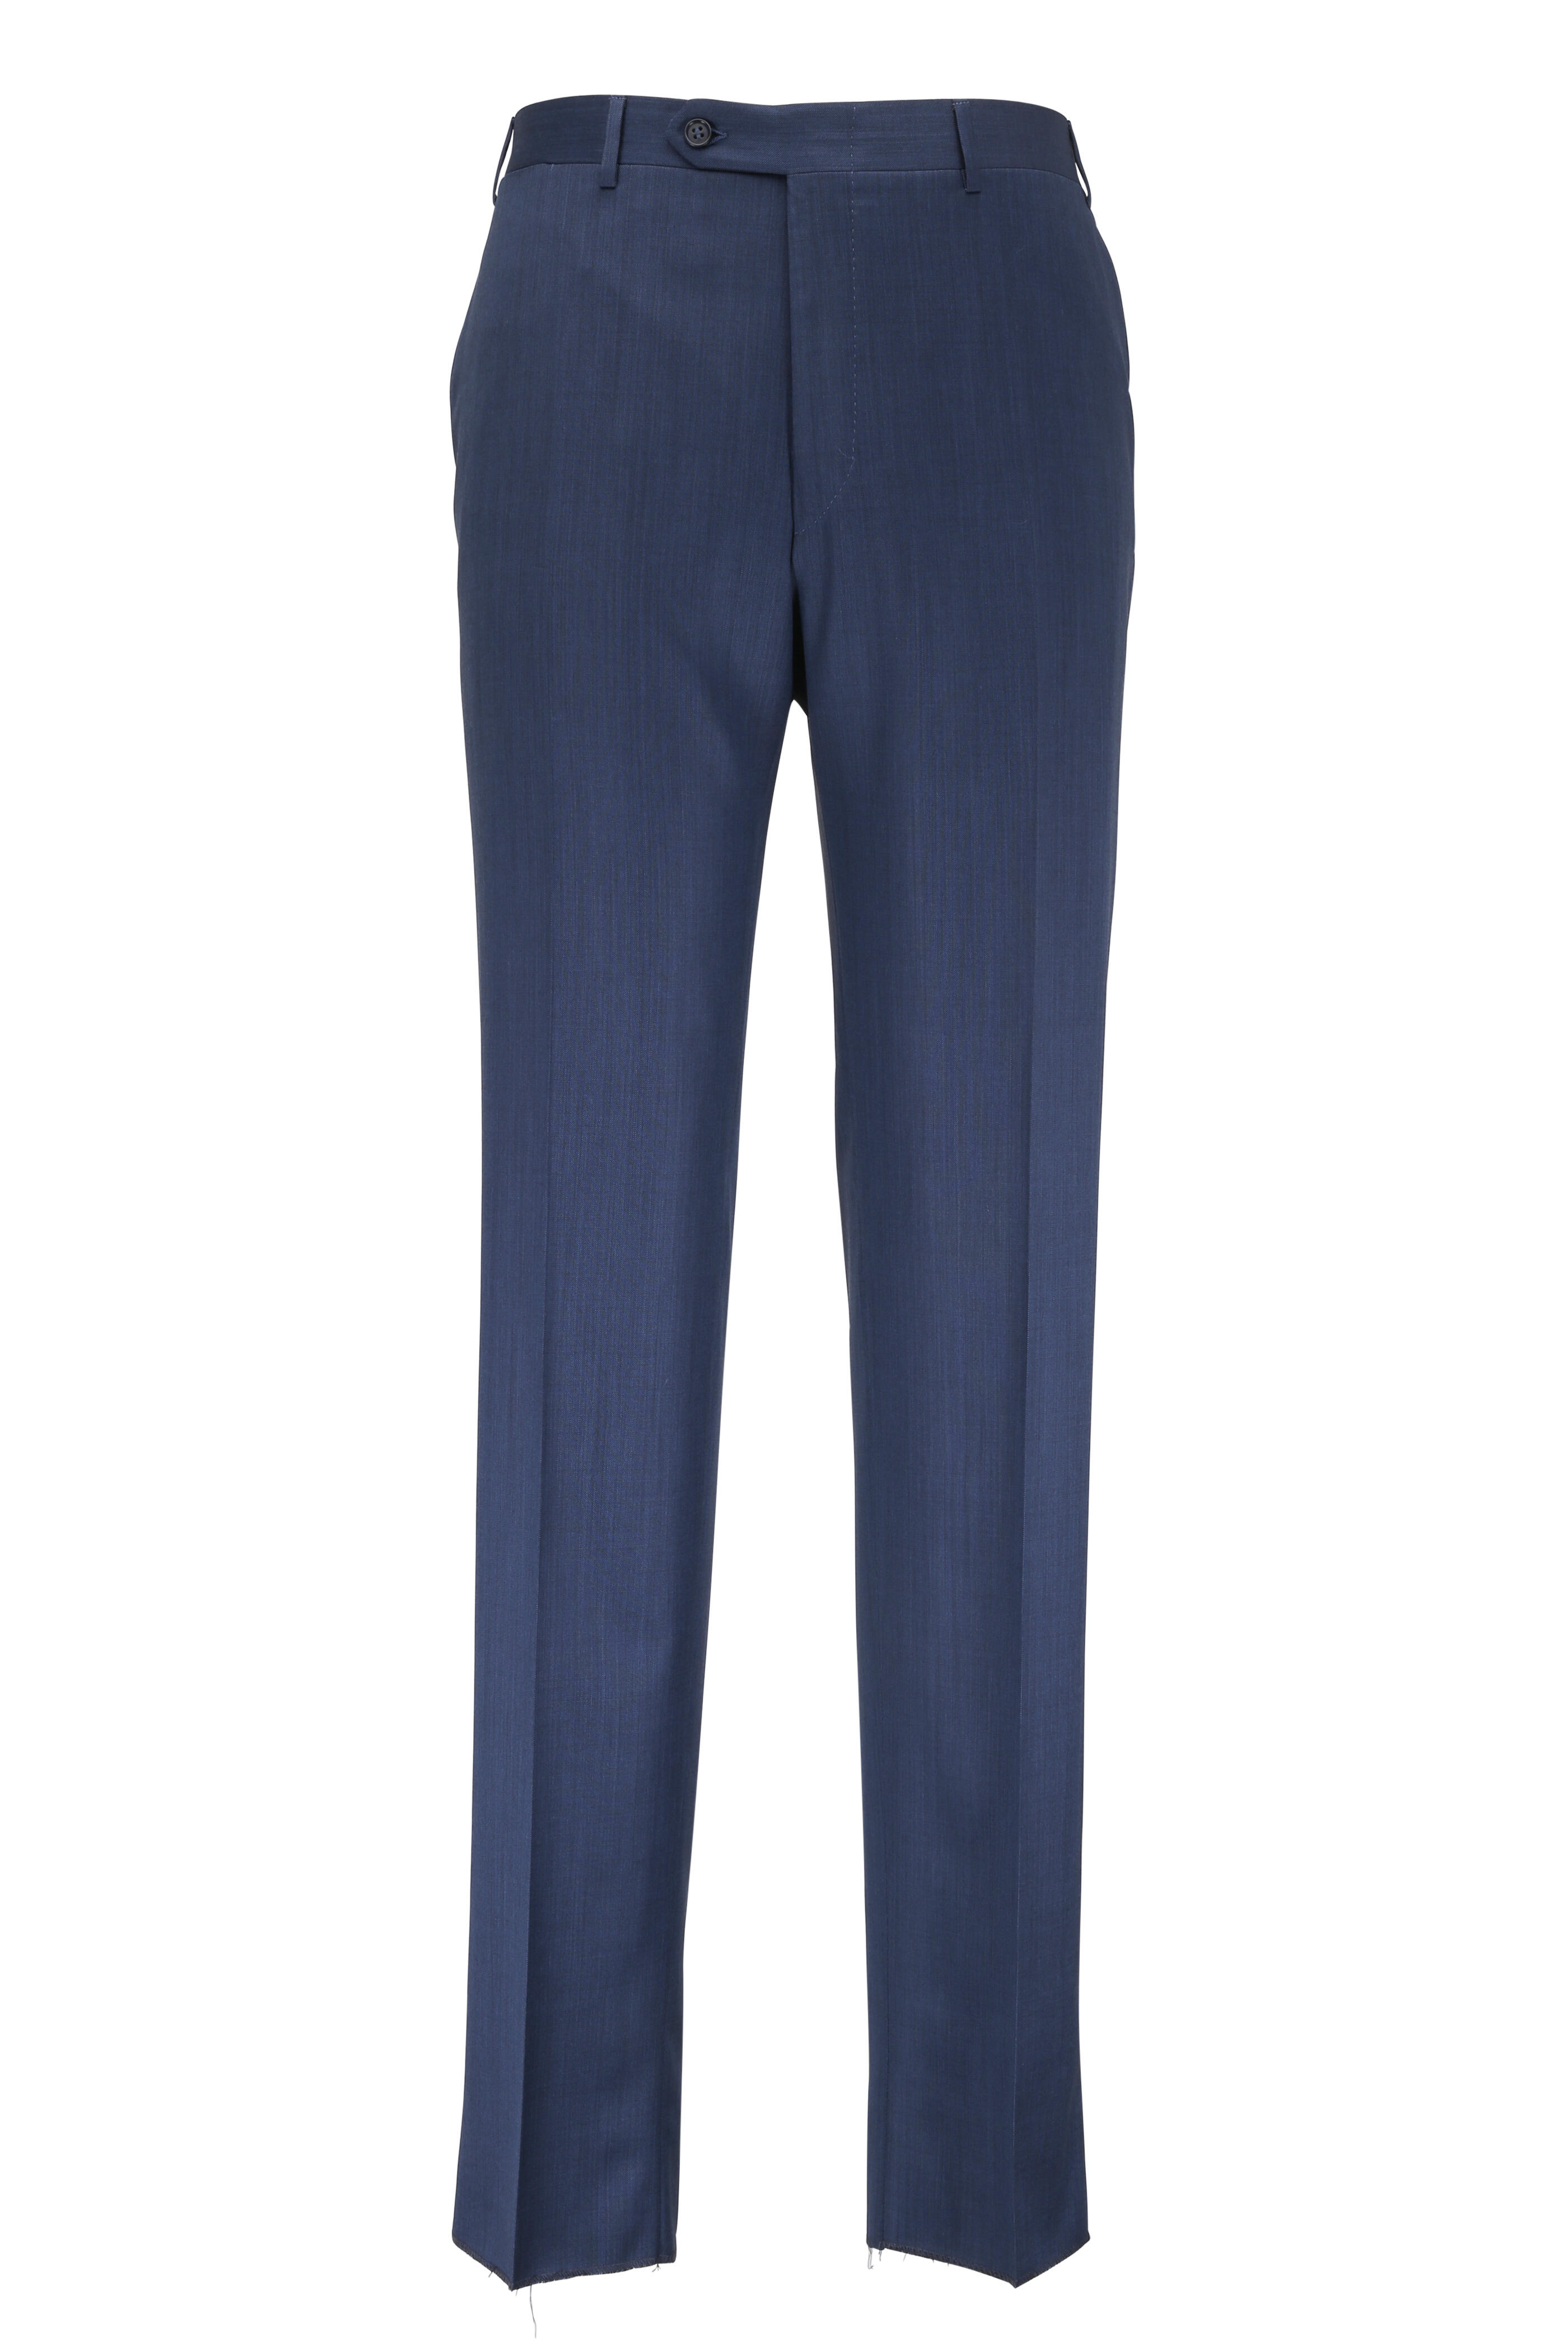 Canali - Blue Wool Suit | Mitchell Stores